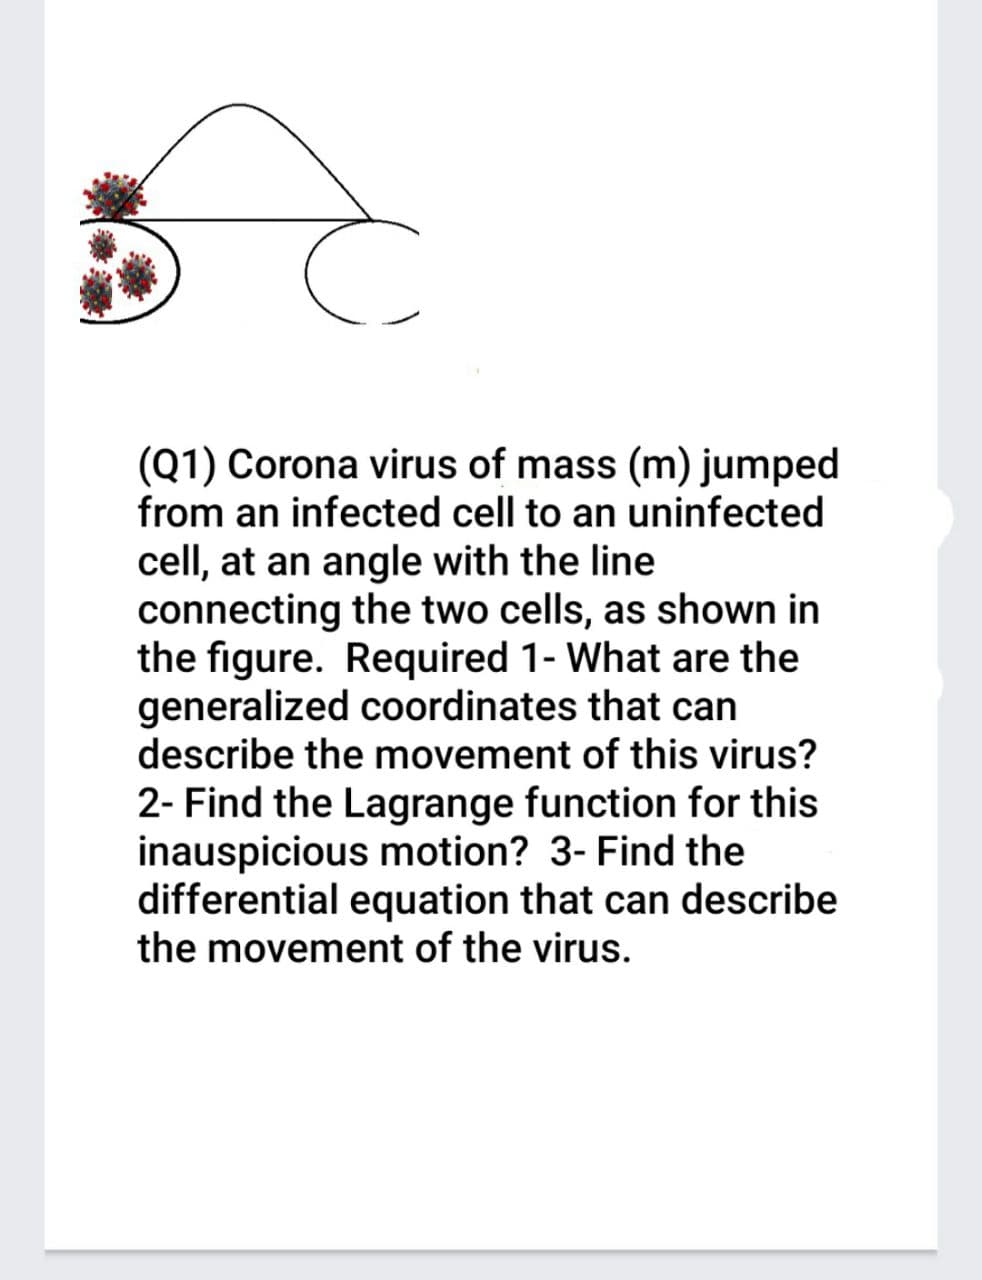 (Q1) Corona virus of mass (m) jumped
from an infected cell to an uninfected
cell, at an angle with the line
connecting the two cells, as shown in
the figure. Required 1- What are the
generalized coordinates that can
describe the movement of this virus?
2- Find the Lagrange function for this
inauspicious motion? 3- Find the
differential equation that can describe
the movement of the virus.
